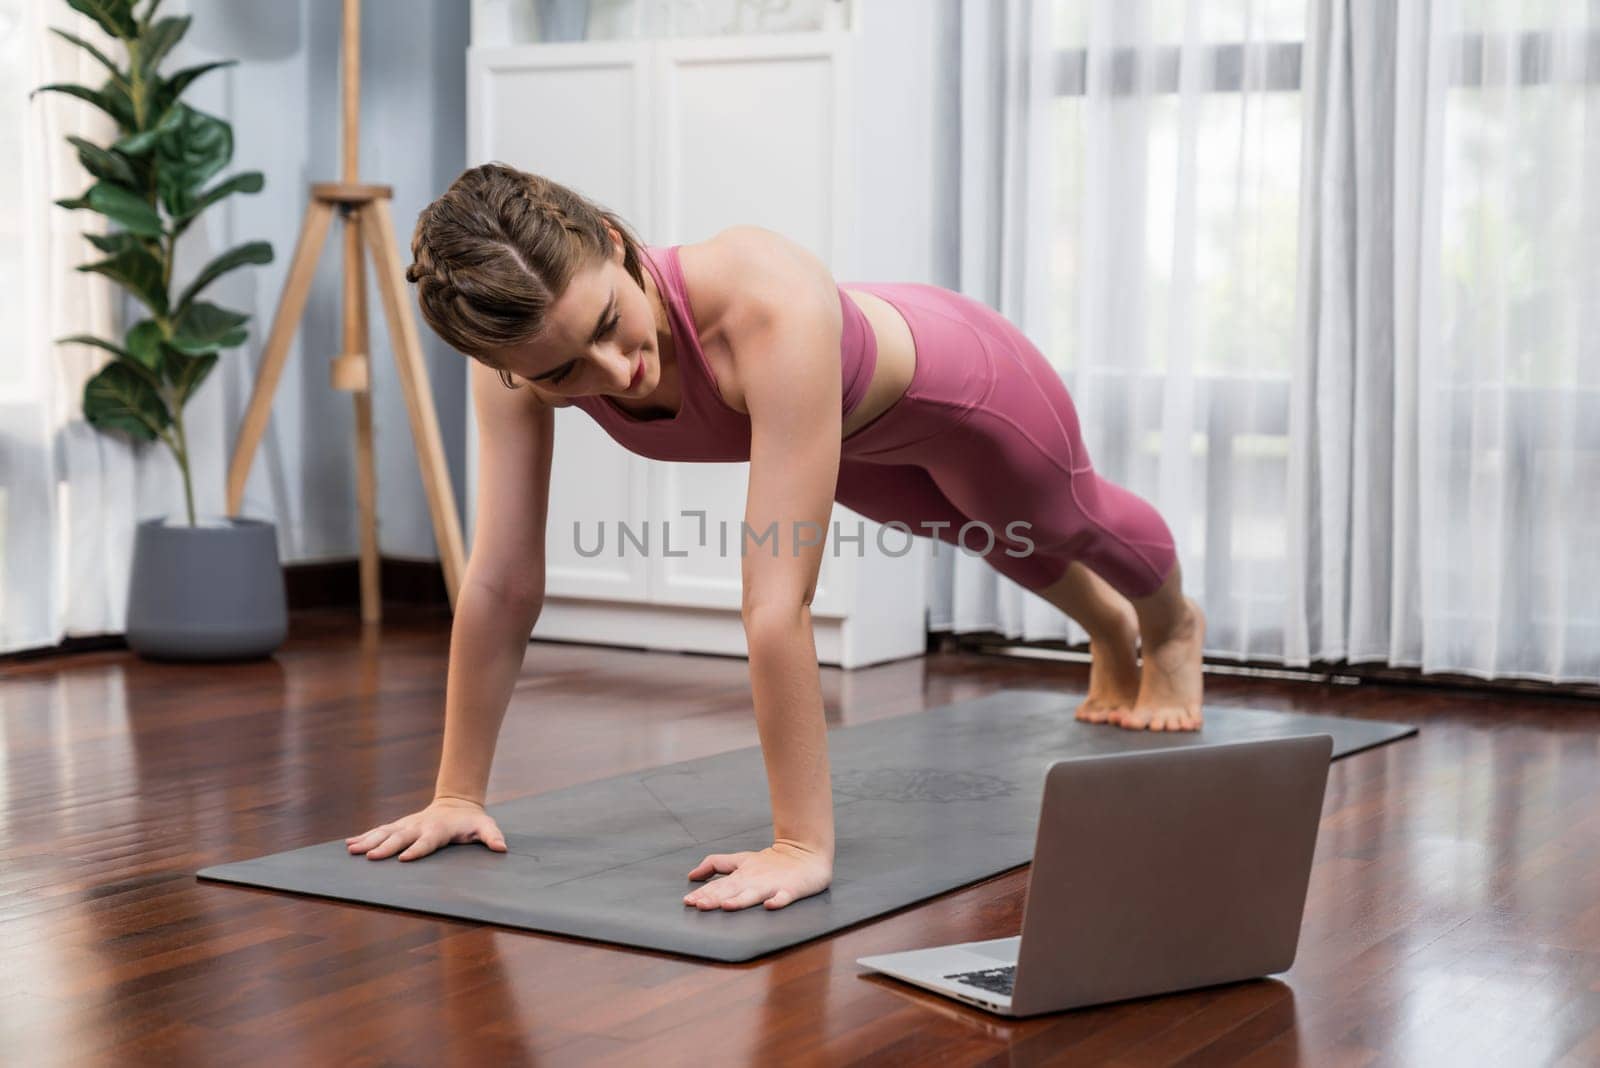 Flexible and dexterity woman in sportswear doing yoga position in meditation posture on exercising mat at home. Healthy gaiety home yoga online training session with peaceful mind and serenity.